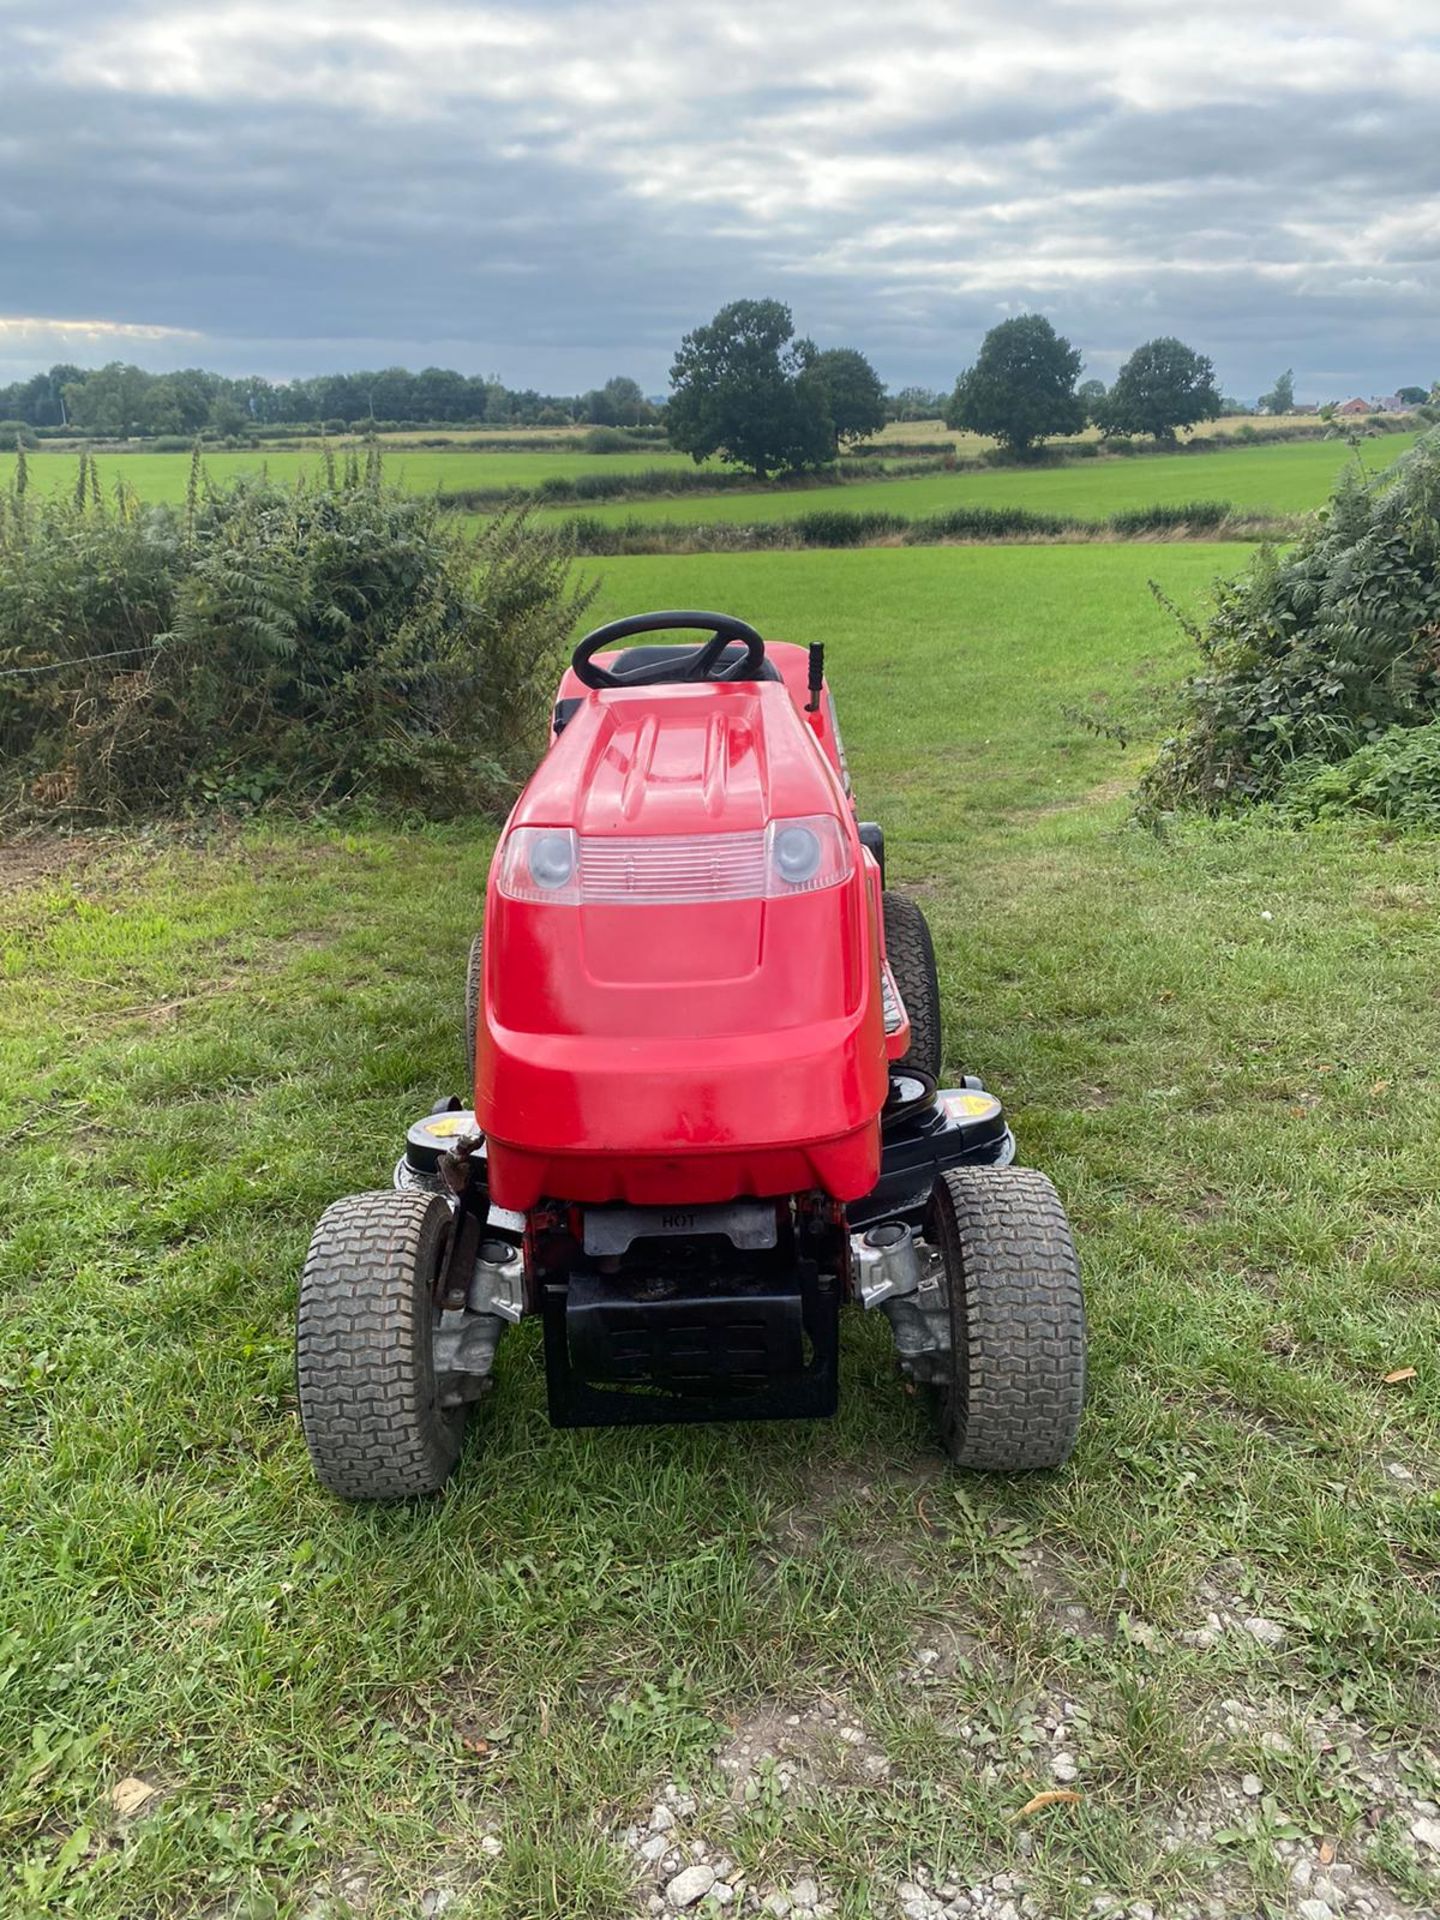 COUNTAX C600H 4 WHEEL DRIVE RIDE ON LAWN MOWER, RUNS DRIVES CUTS AND COLLECTS *NO VAT* - Image 8 of 11